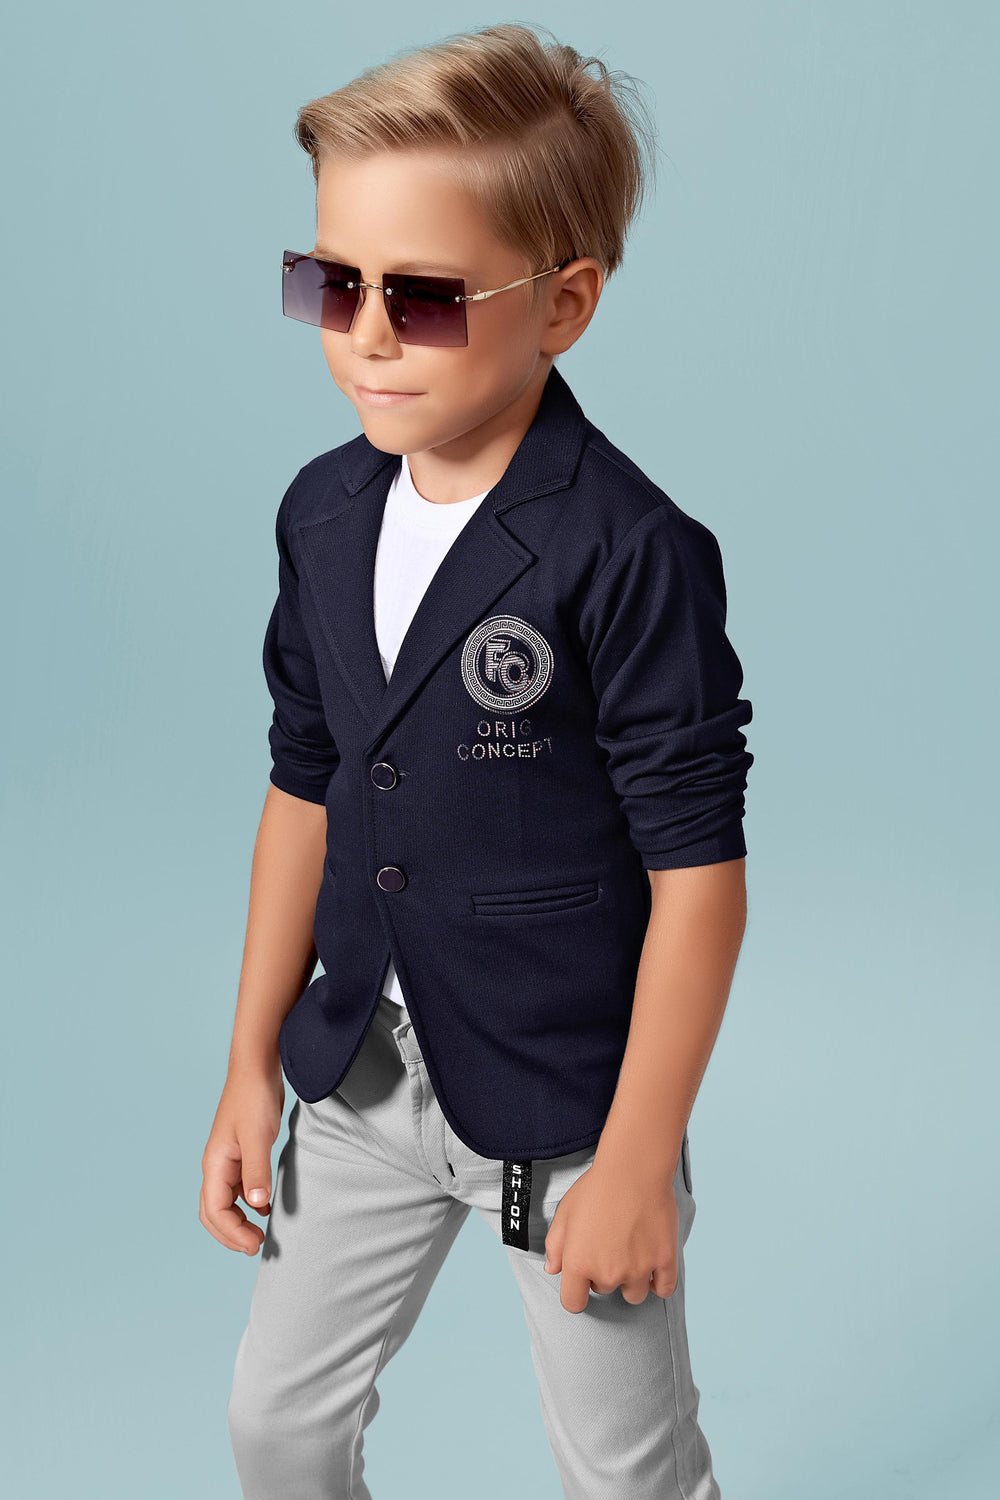 White and Grey with Navy Blue Waist Coat and Set for Boys with Belt - Seasons Chennai